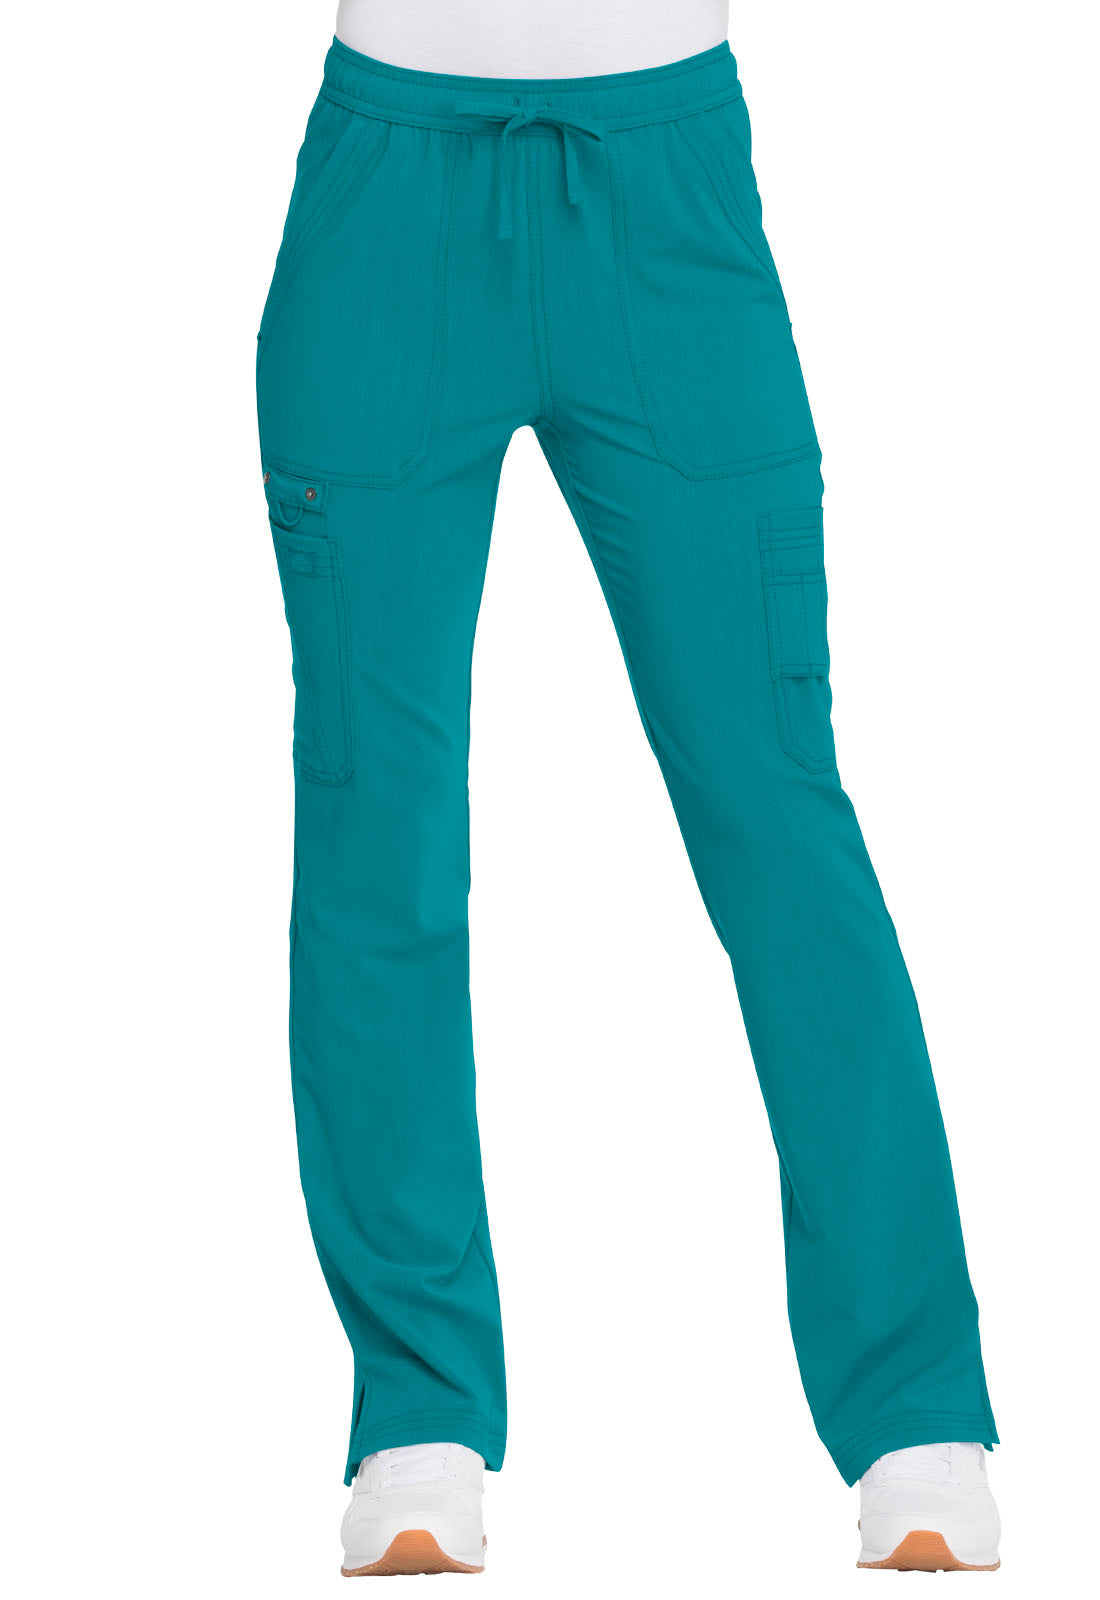 OUT Conj. Qx. Mujer Dickies Advance DK755/DK200 Teal